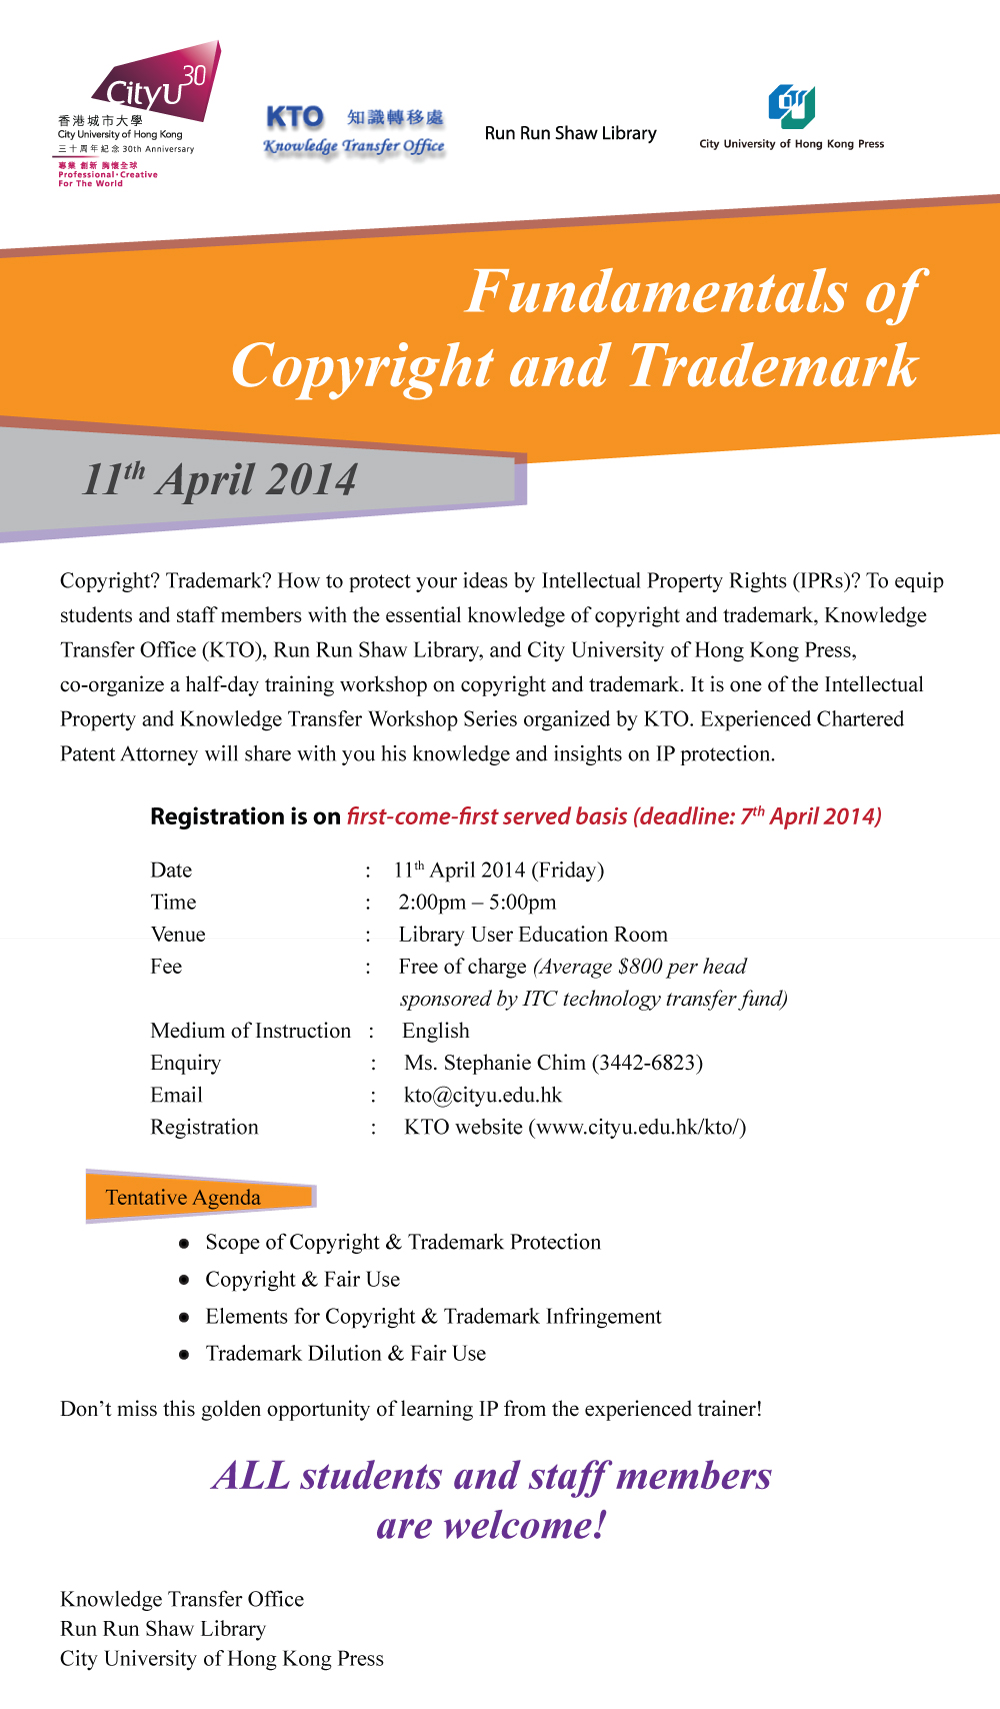 Workshop: Intellectual Property Workshop: Fundamentals of Copyright and Trademark,
        Speaker: Experienced Chartered Patent Attorney,
        Date: 11 April 2014 (Friday),
        Time: 2:00pm - 5:00pm,
        Venue: Library User Education Room,
        Fee: Free of charge (Average $800 per head sponsored by ITC technology transfer fund),
        Medium of Instruction: English,
        Enquiry: Ms. Stephanie Chim (3442-6823),
        Email: kto@cityu.edu.hk,
        Registration: KTO website (www.cityu.edu.hk/kto/),
        Registration is on first-come-first served basis,
        Deadline: 7 April 2014